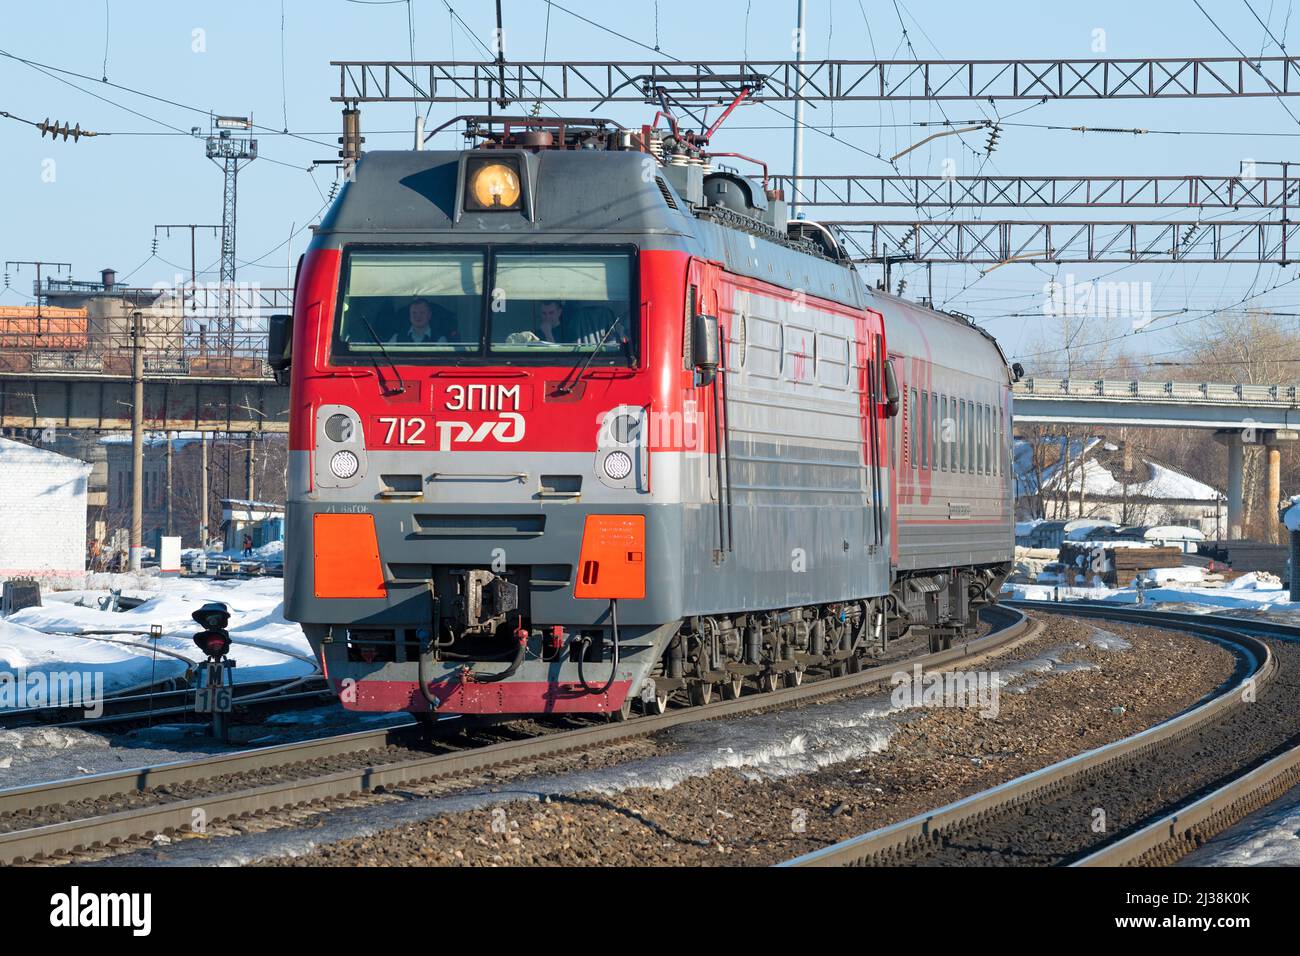 SHARYA, RUSSIA - MARCH 18, 2022: Russian modern electric locomotive EP1M-712 with a passenger train on the Sharya station of the Northern Railway Stock Photo